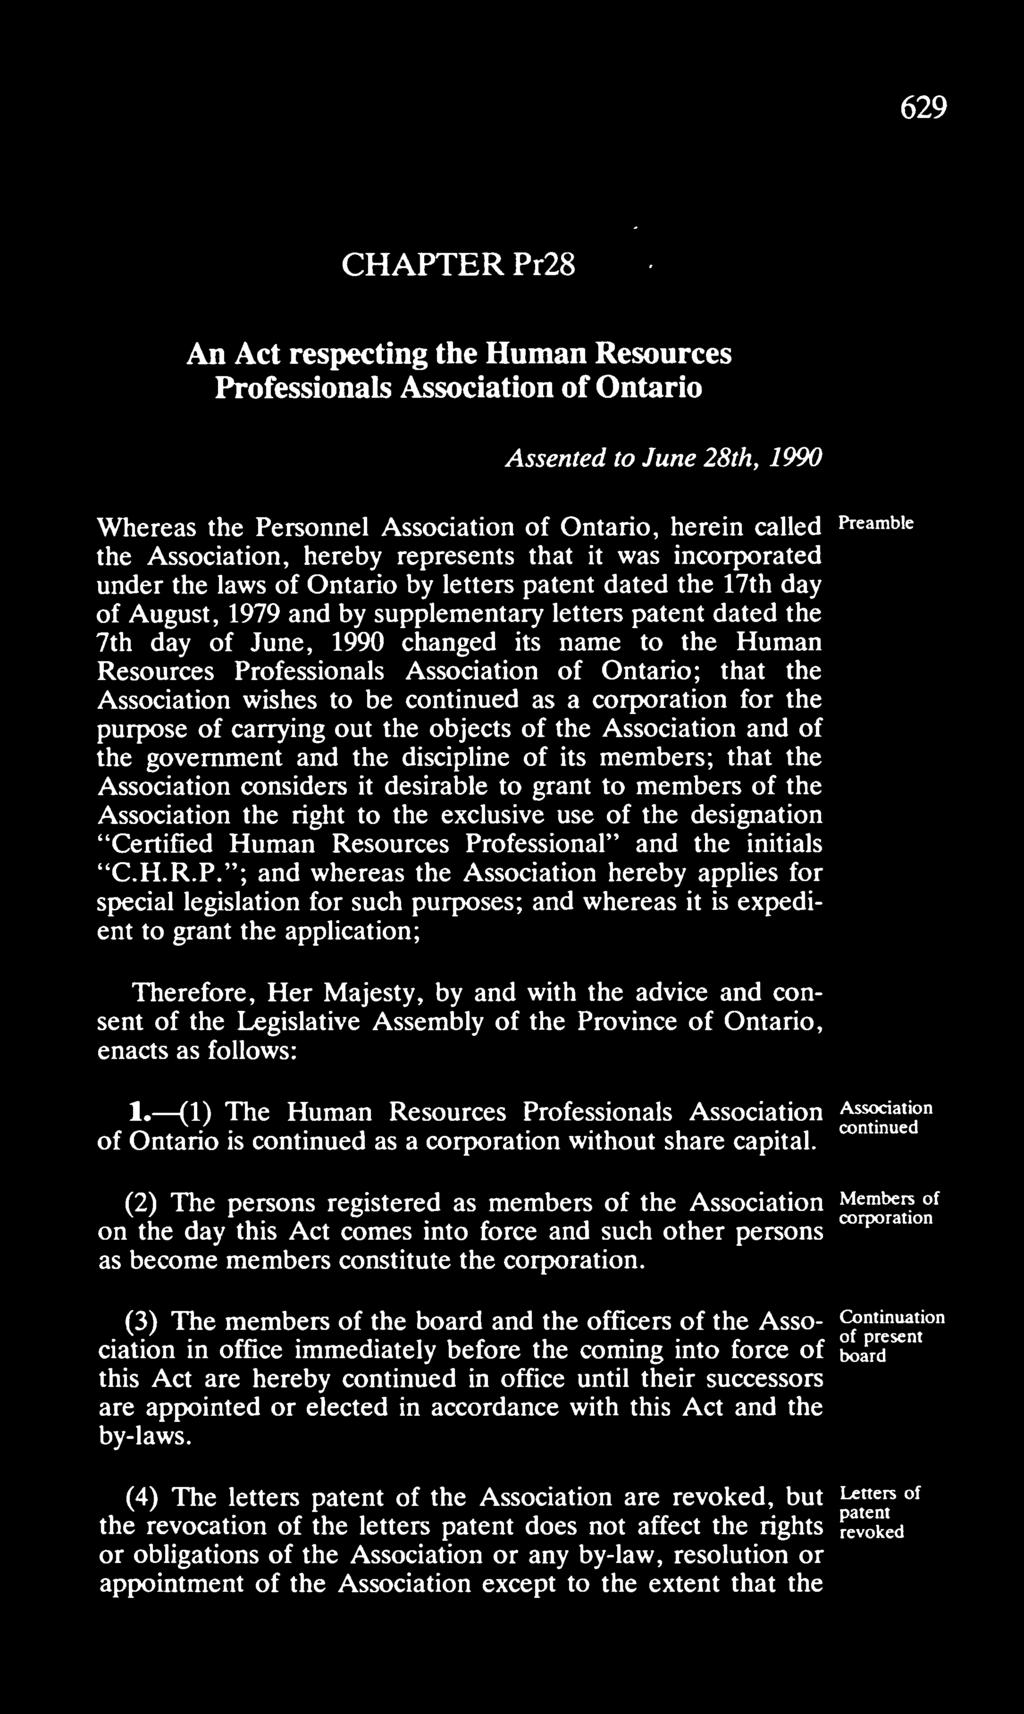 its name to the Human Resources Professionals Association of Ontario; that the Association wishes to be continued as a corporation for the purpose of carrying out the objects of the Association and